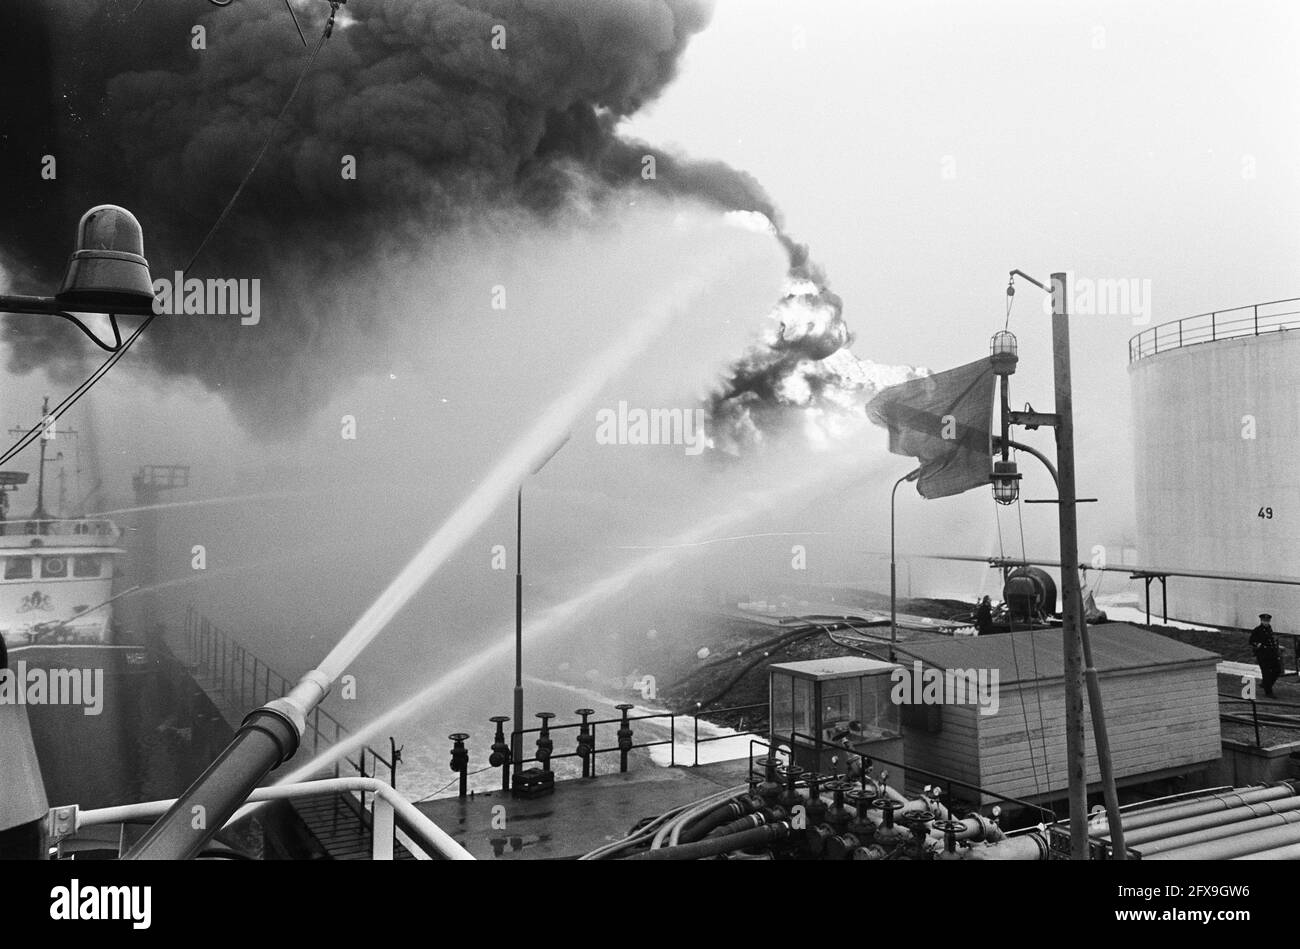 Fire in gasoline storage tank at Comos Amsterdam. An enormous amount of foam was sprayed around the tank, 21 November 1969, fires, The Netherlands, 20th century press agency photo, news to remember, documentary, historic photography 1945-1990, visual stories, human history of the Twentieth Century, capturing moments in time Stock Photo